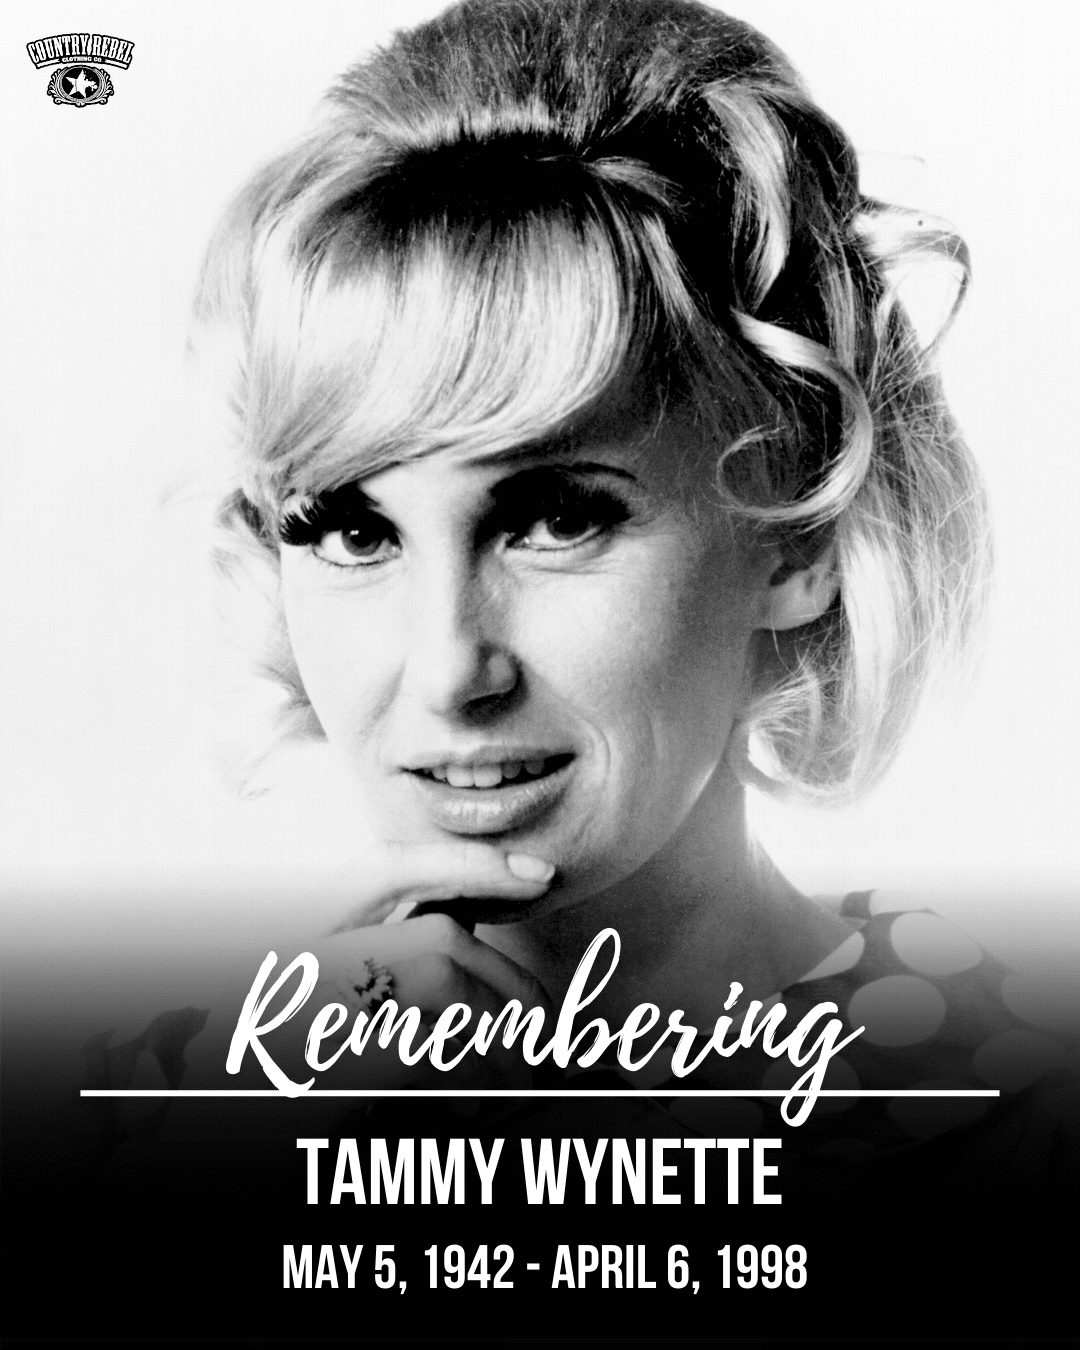 These tributes honored Tammy Wynette after her death in 1998.